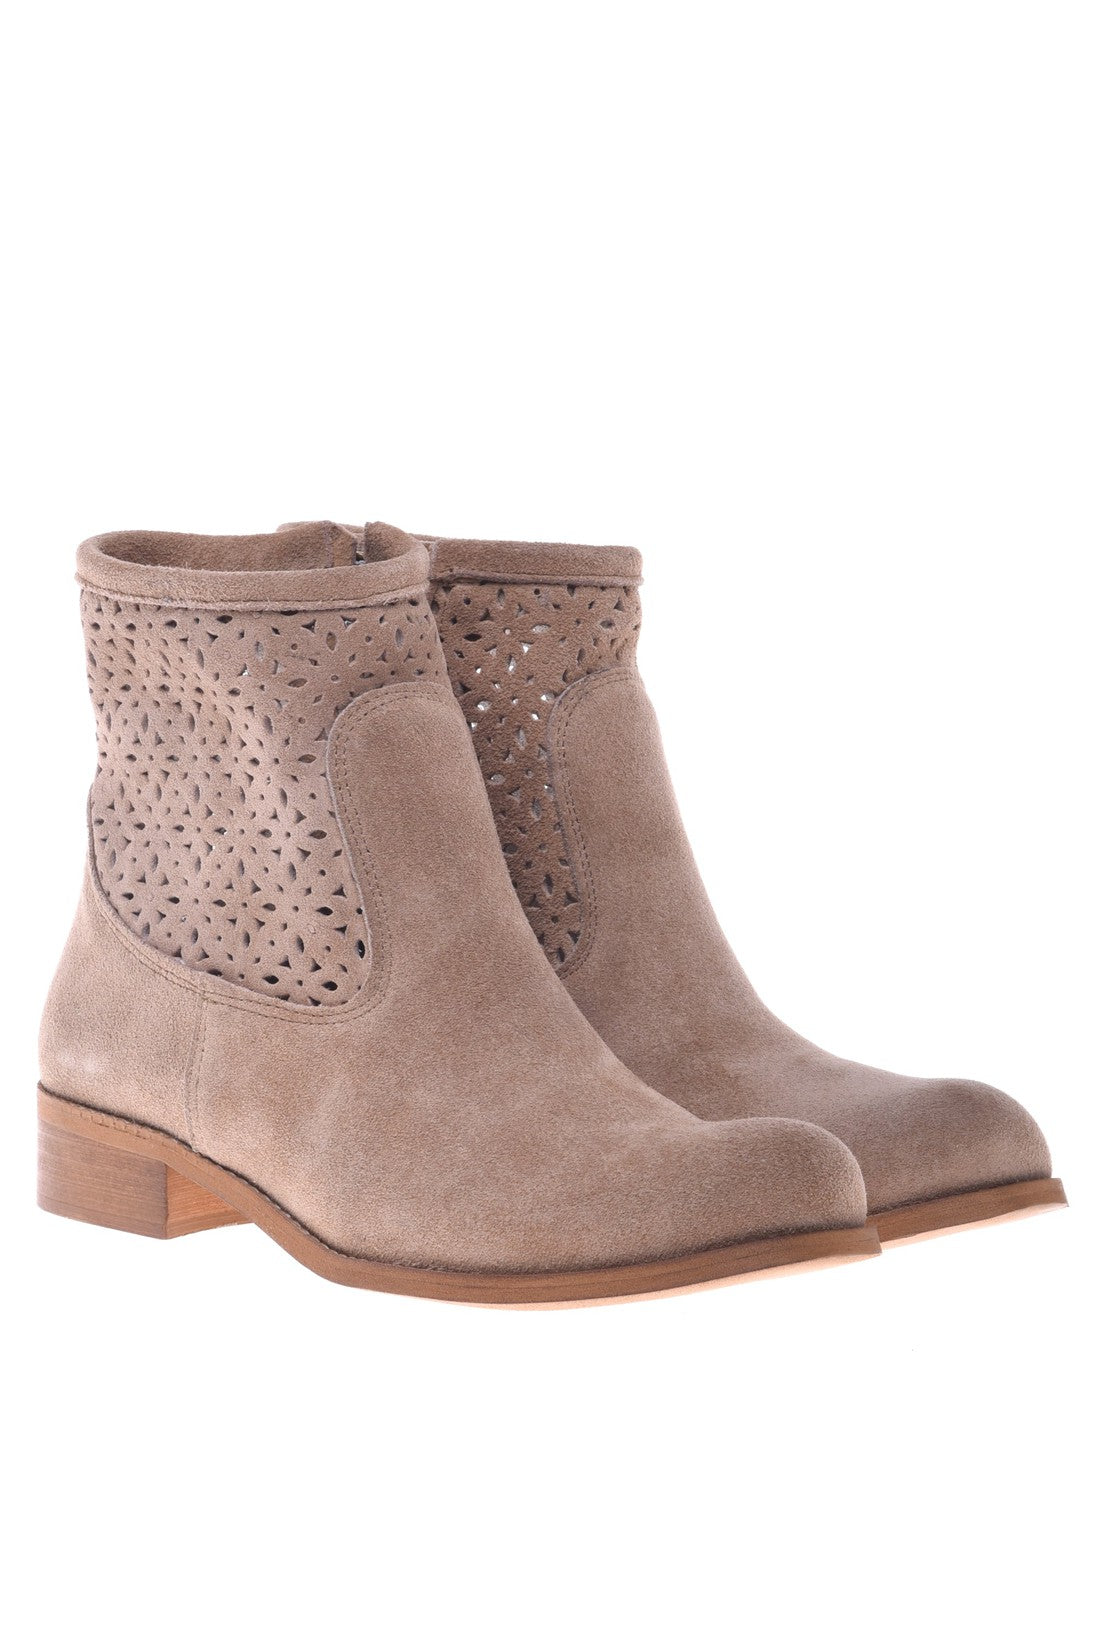 BALDININI-OUTLET-SALE-Ballerina-pump-in-taupe-suede-Stiefel-Stiefeletten-ARCHIVE-COLLECTION-3_fb572d73-4433-4562-b98b-259f305b4b23.jpg